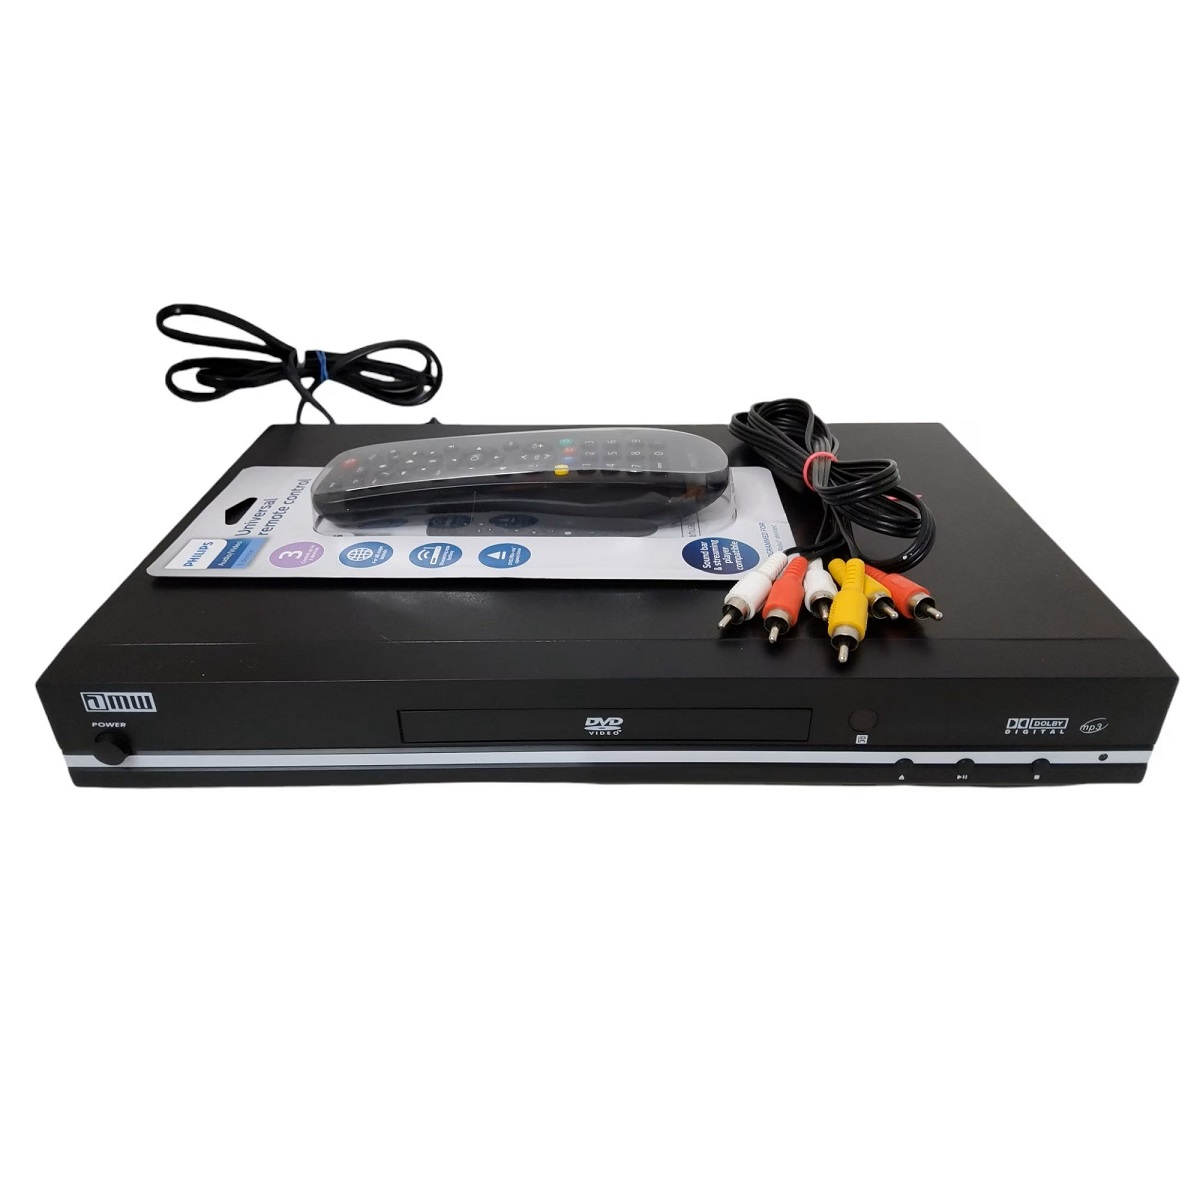 How To Program Universal Remote For DVD Player